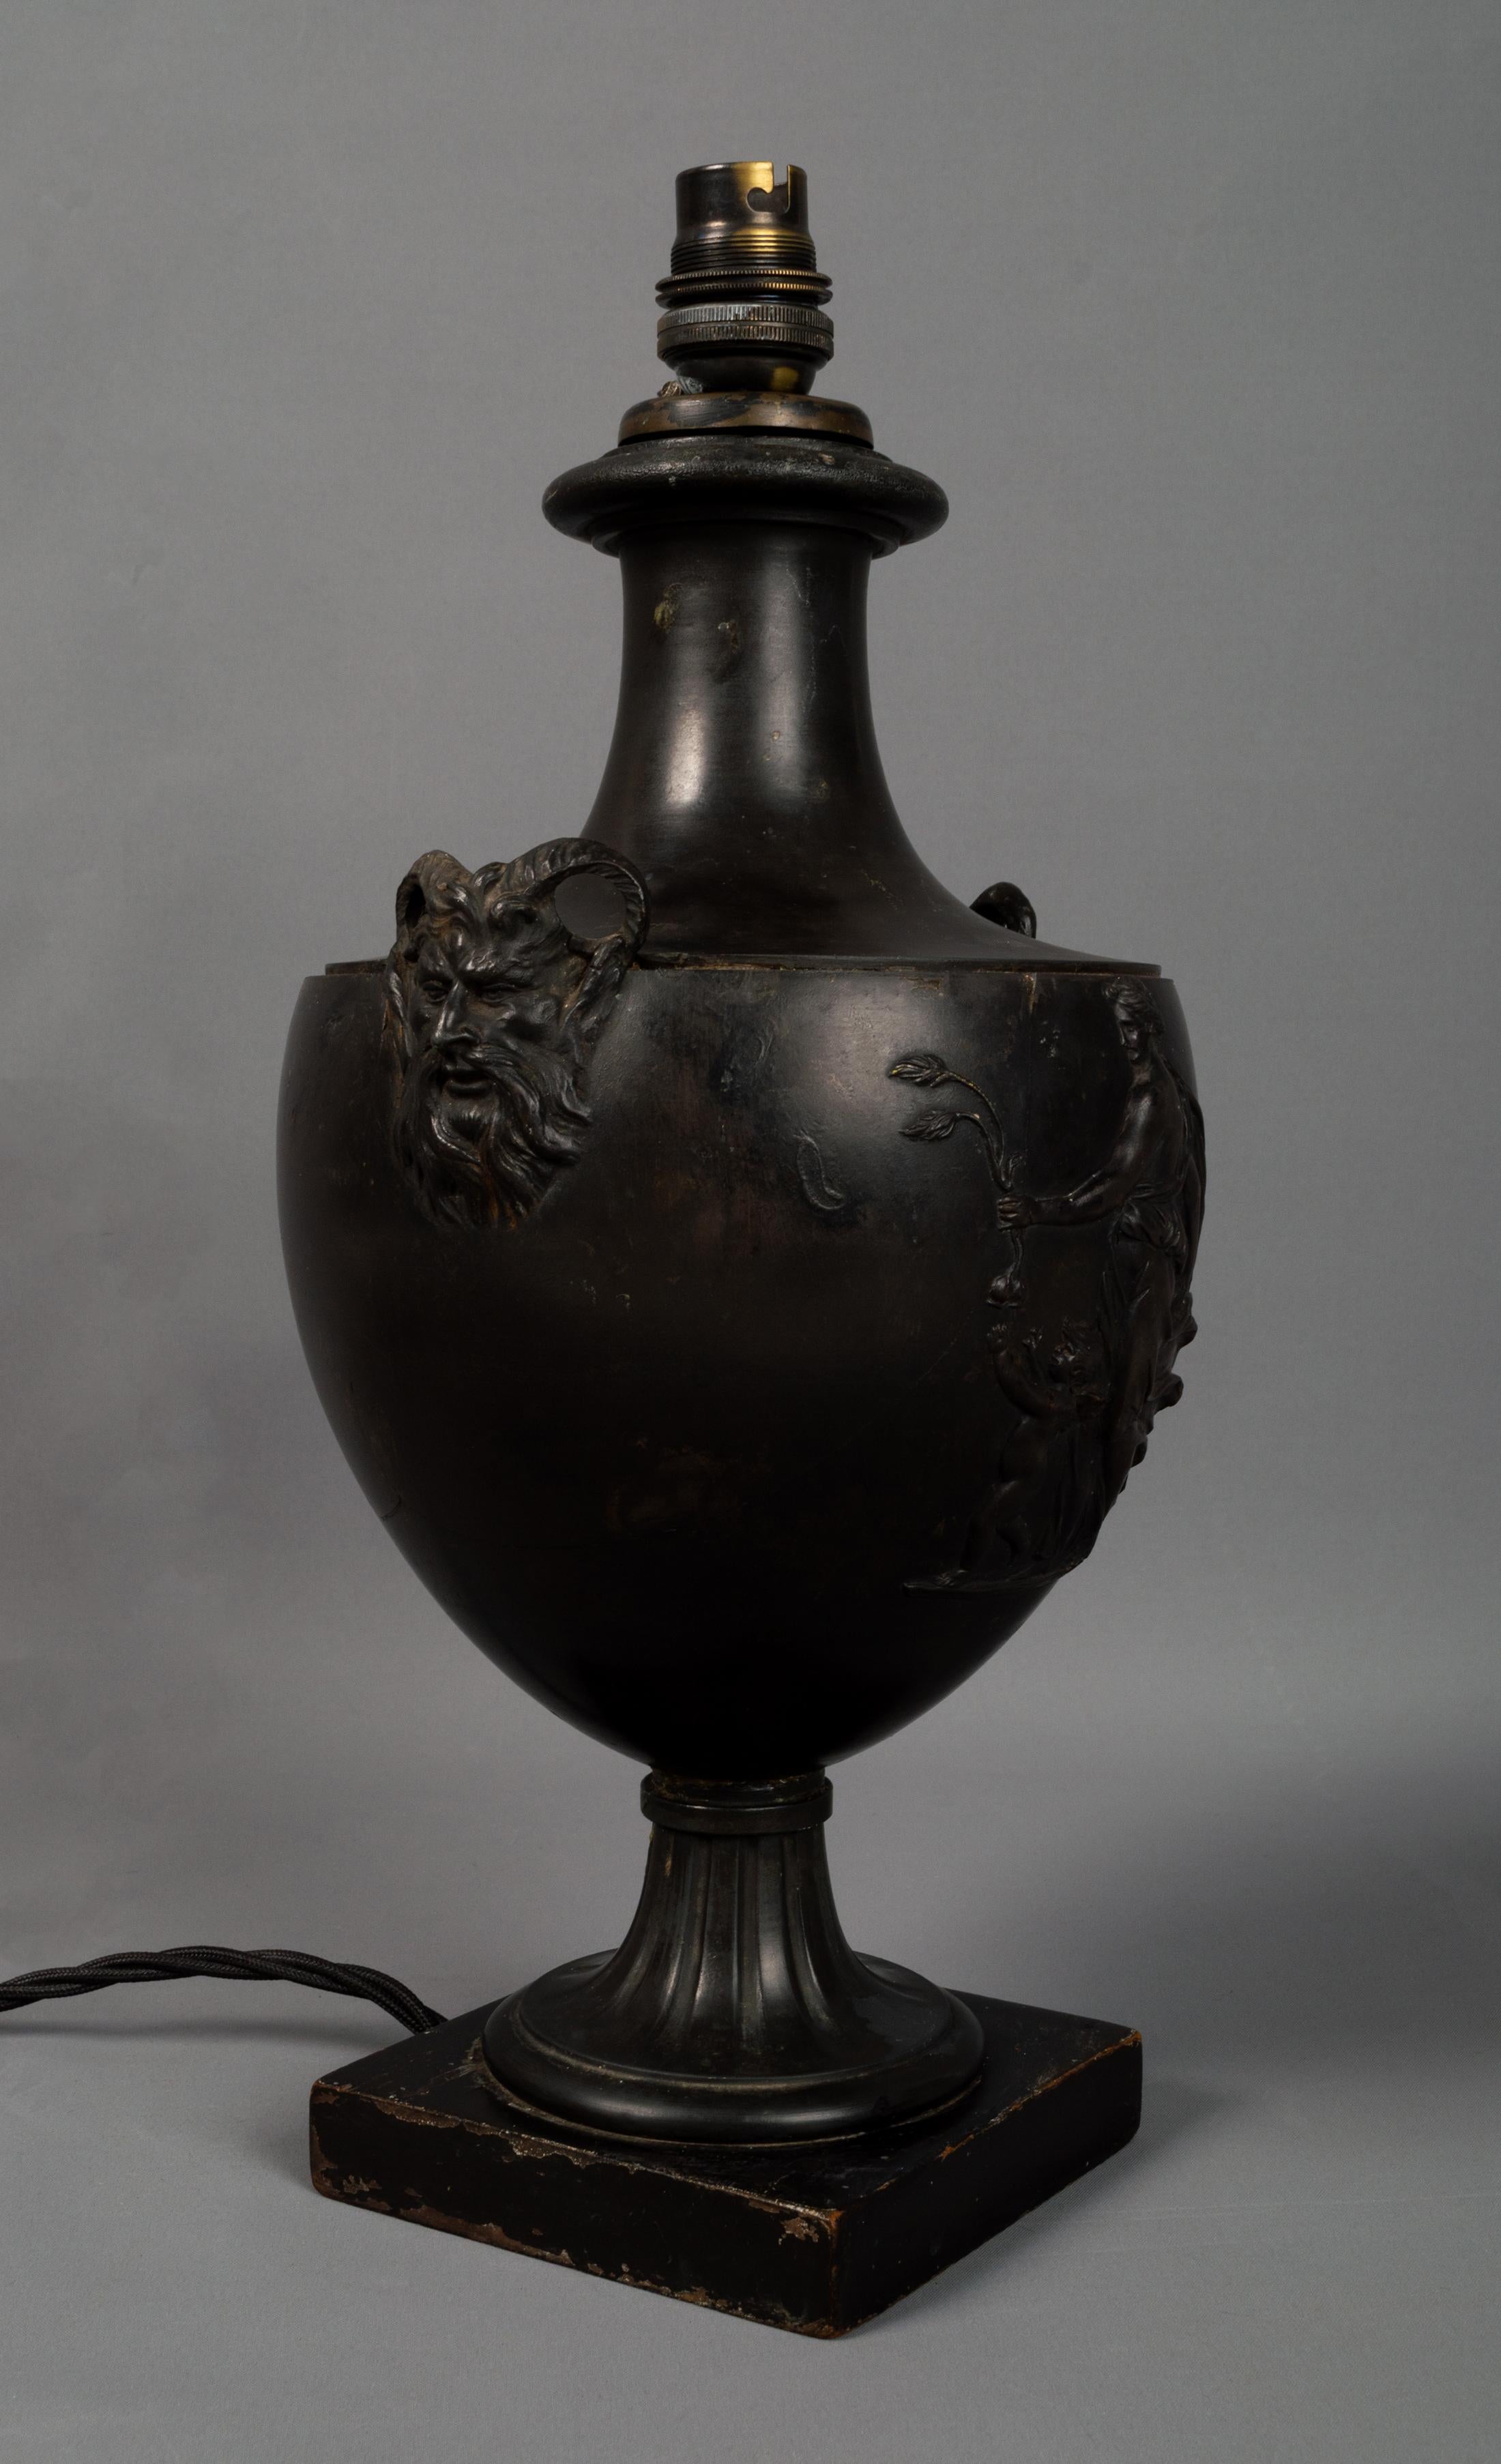 Antique 19th Century Neoclassical Revival Vase Lamp Germany C.1880 In Good Condition For Sale In London, GB